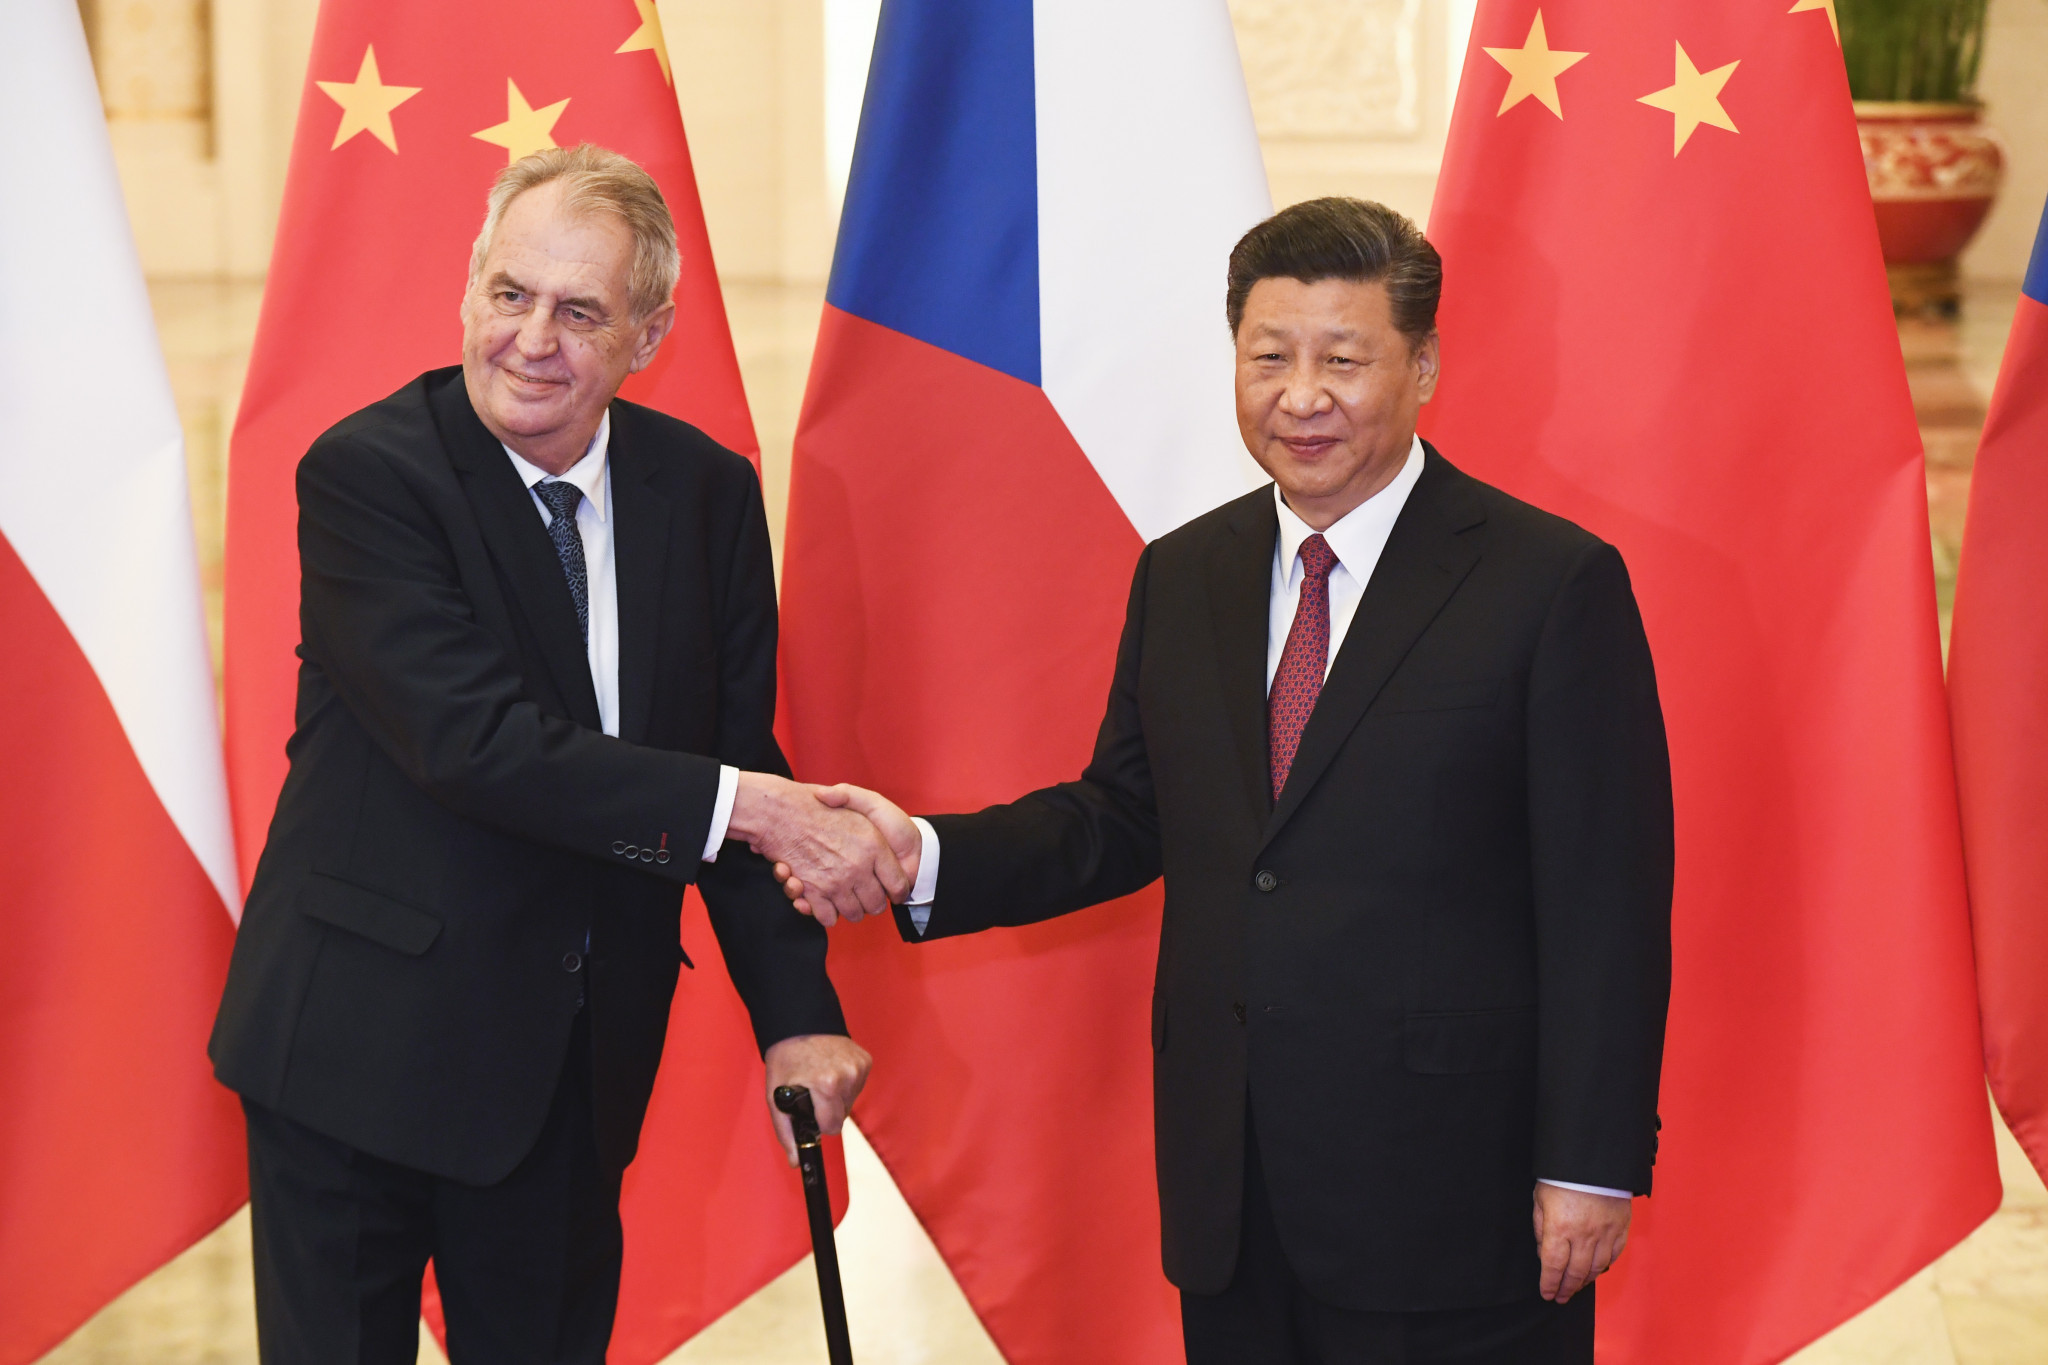 Czech Republic President Miloš Zeman, left and pictured with Chinese counterpart Xi Jinping in 2019, has long made efforts to forge closer ties between the two nations ©Getty Images